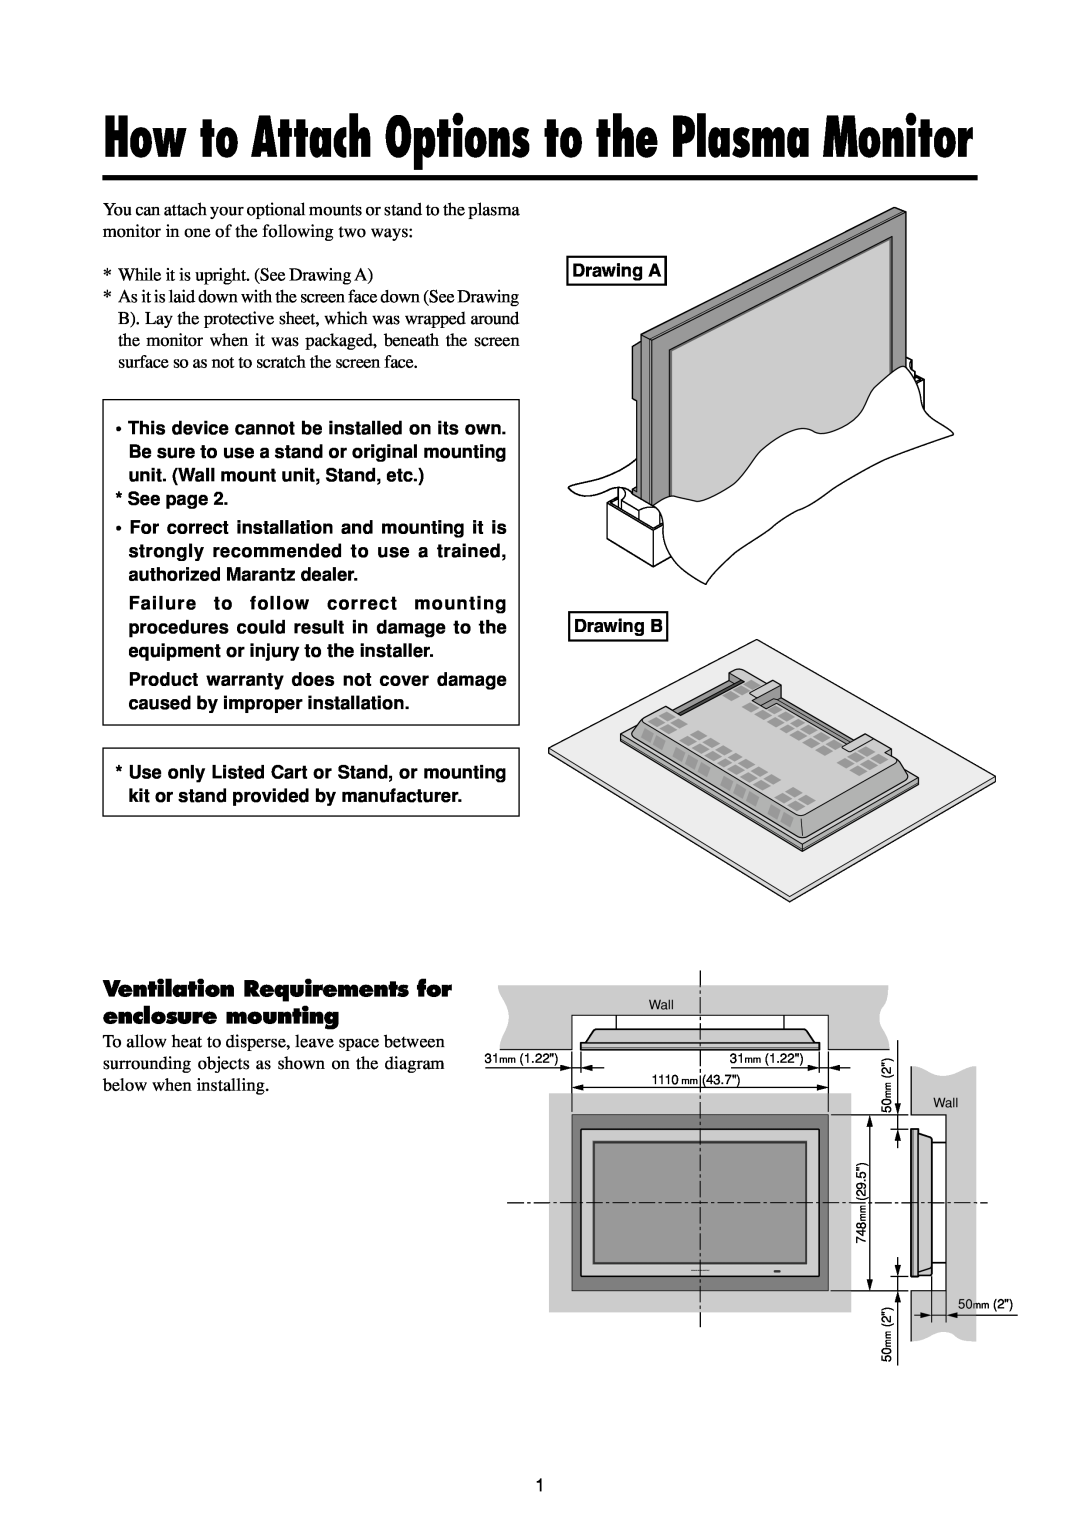 Marantz PD4293D manual Ventilation Requirements for enclosure mounting, unit. Wall mount unit, Stand, etc. * See page 